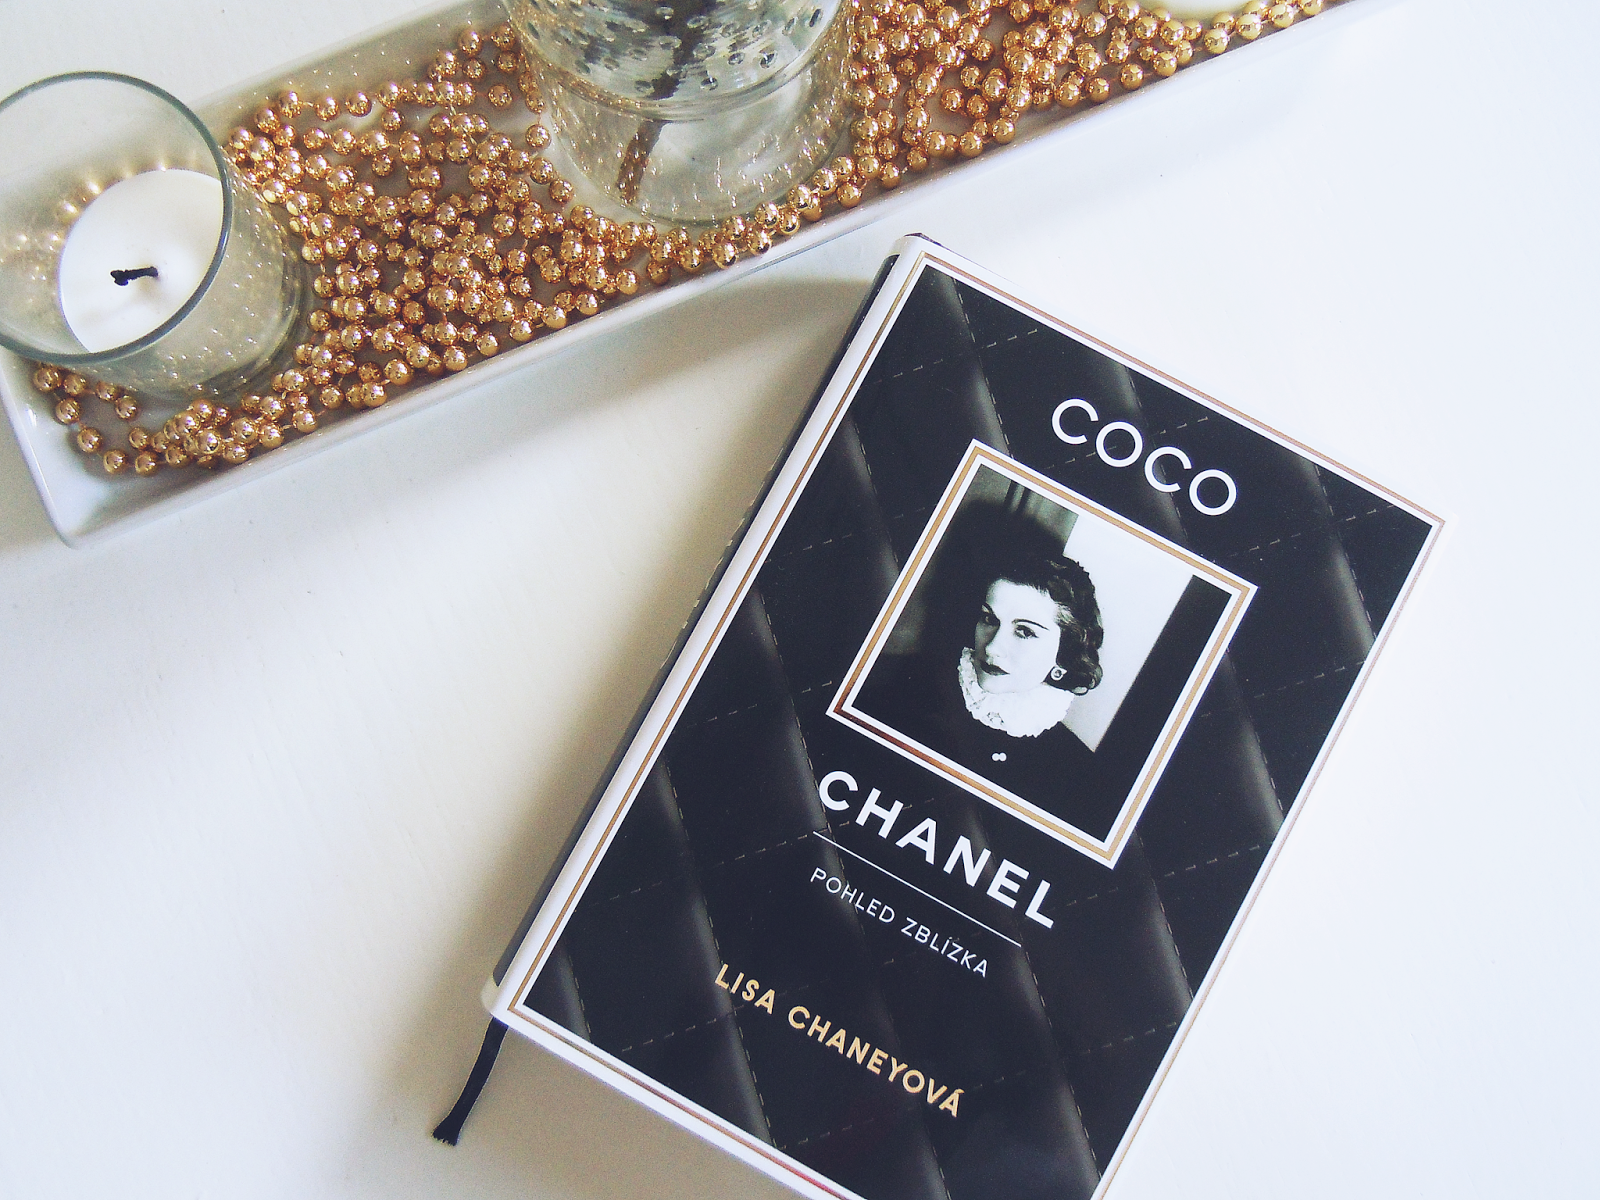 The Beauty Alchemist: Coco Chanel - An Intimate Life by Lisa Chaney